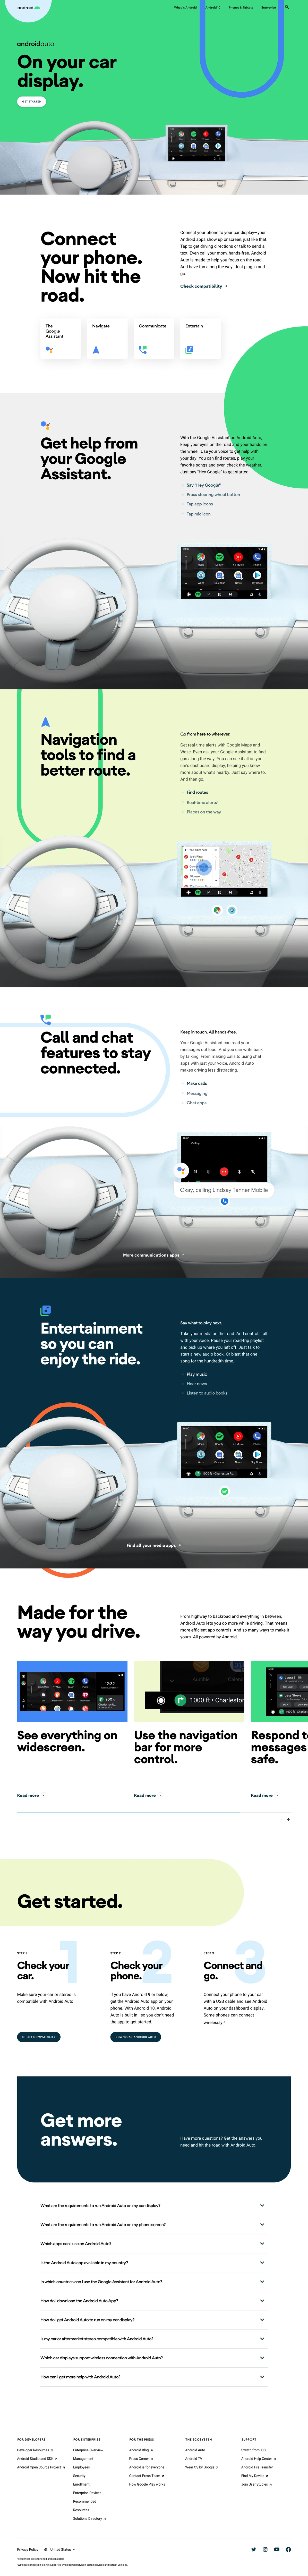 Android Auto Landing Page Example: Experience the best features of your Android device when driving with Android Auto. Just tap your car display or get hands-free help with your Google Assistant. So you can focus on the road.